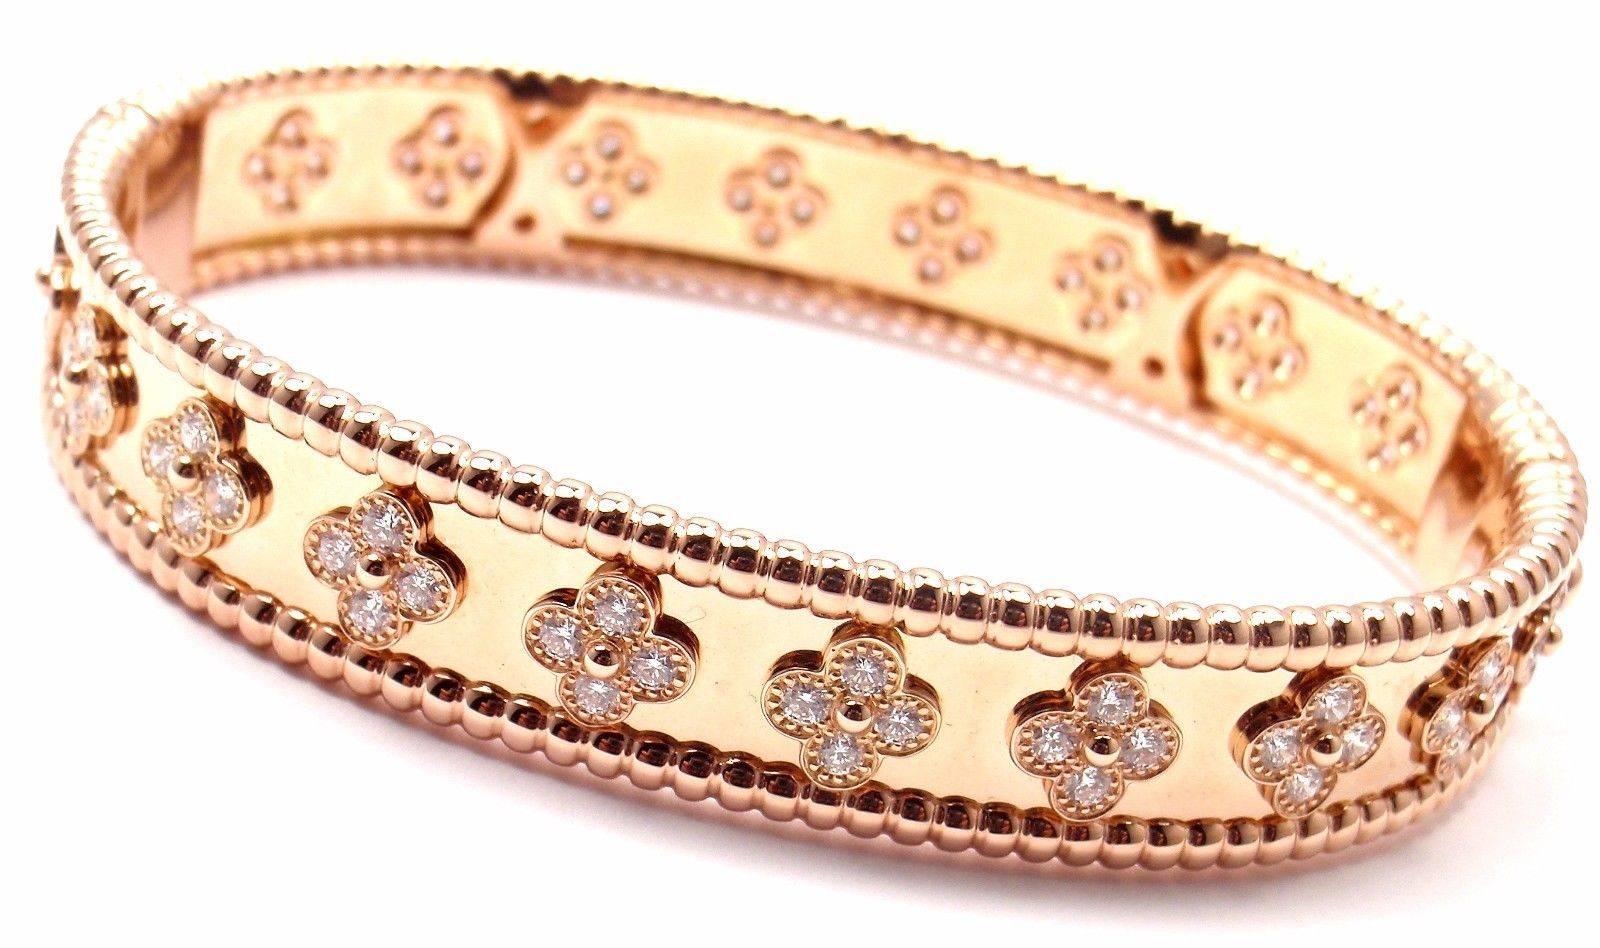 18k Rose Gold Diamond Clover Perlee Bangle Bracelet by Van Cleef & Arpels.  
With 80 brilliant round cut diamond VVS1 clarity, E color
Total weight approx. 1.78ct
This bracelet comes with original Van Cleef & Arpels certificate.
Retail Price: